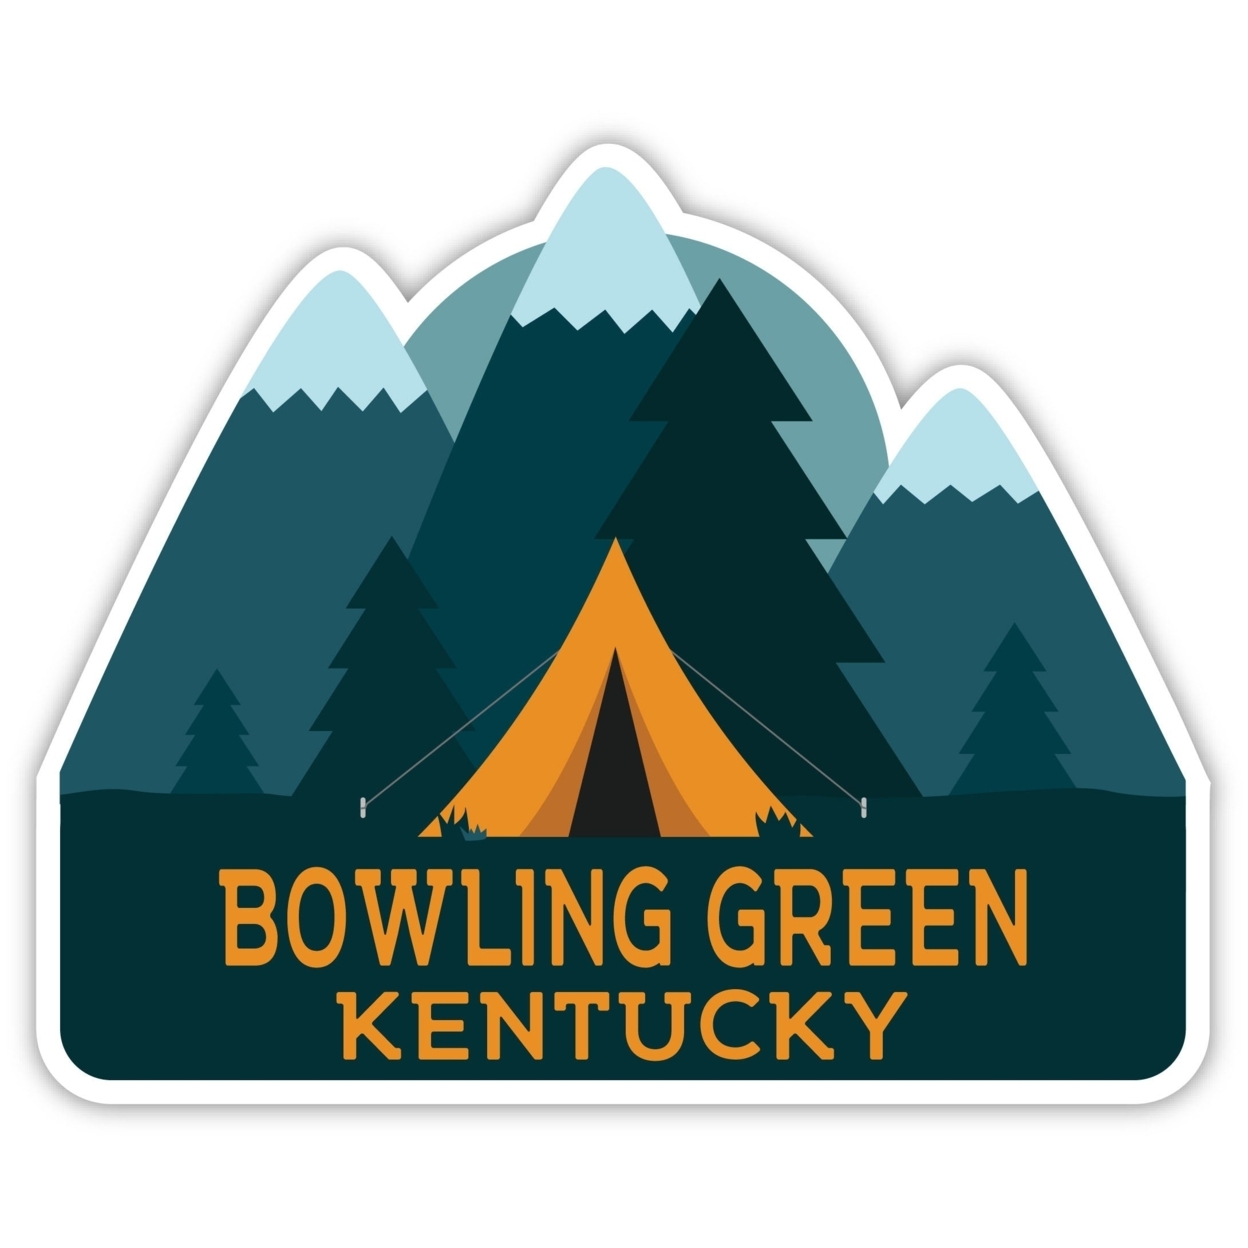 Bowling Green Kentucky Souvenir Decorative Stickers (Choose Theme And Size) - 4-Pack, 10-Inch, Tent